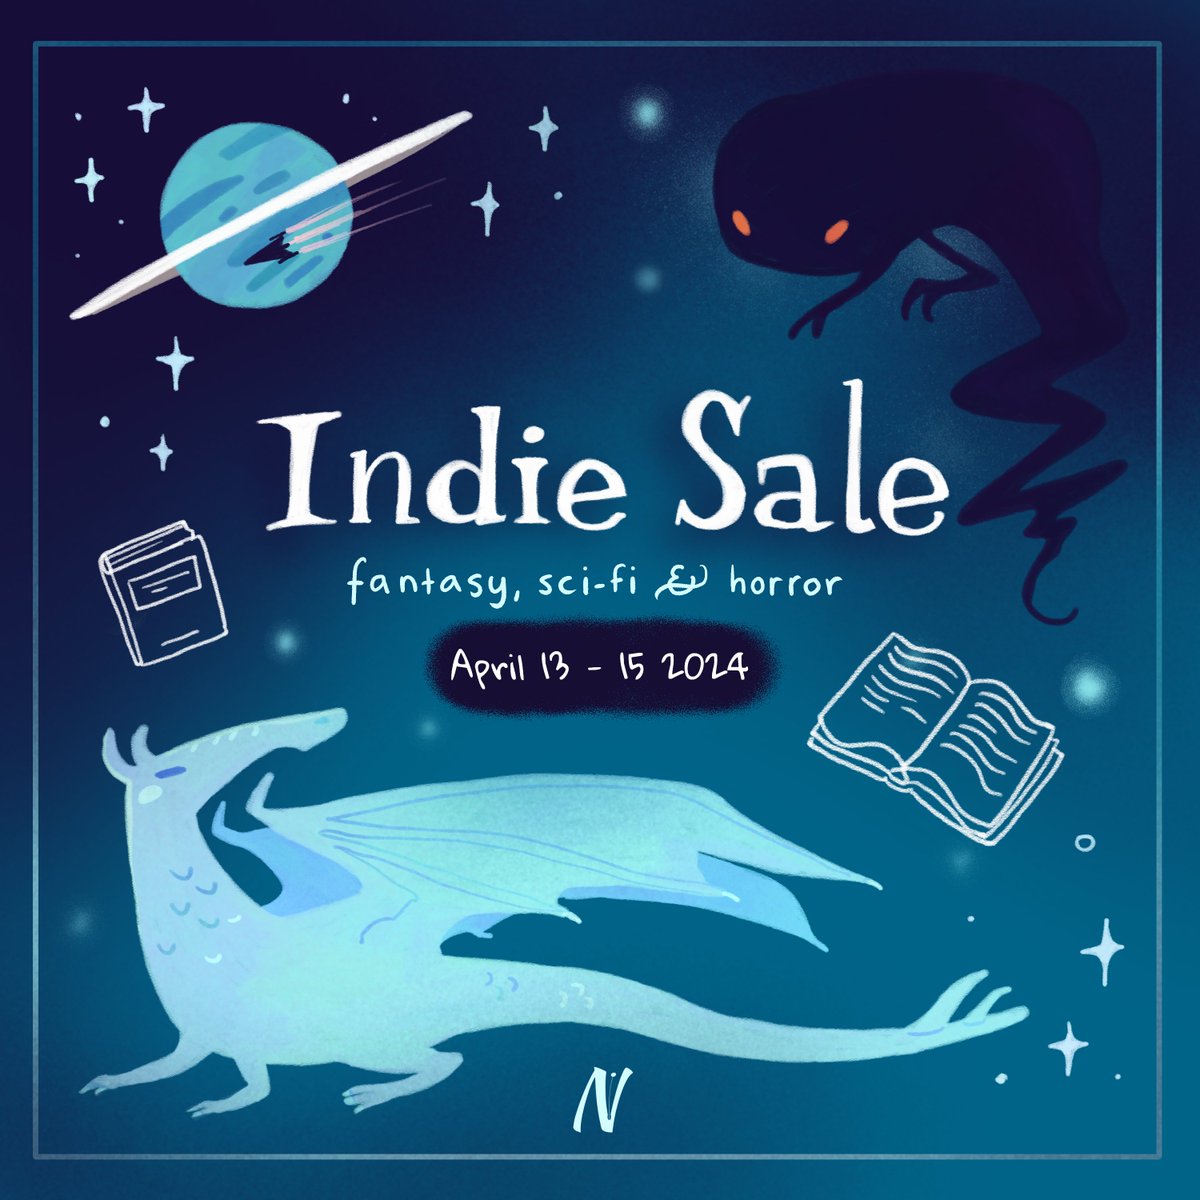 It's the last day of #NarratessIndieSale  so if you haven't already. it's worth checking out the selection of fantasy, sci-fi and horror books discounted or free (like my #middlegrade fantasy #TheLuckyDiamond...)
indiebook.sale

#BookSale #BooksWorthReading #books